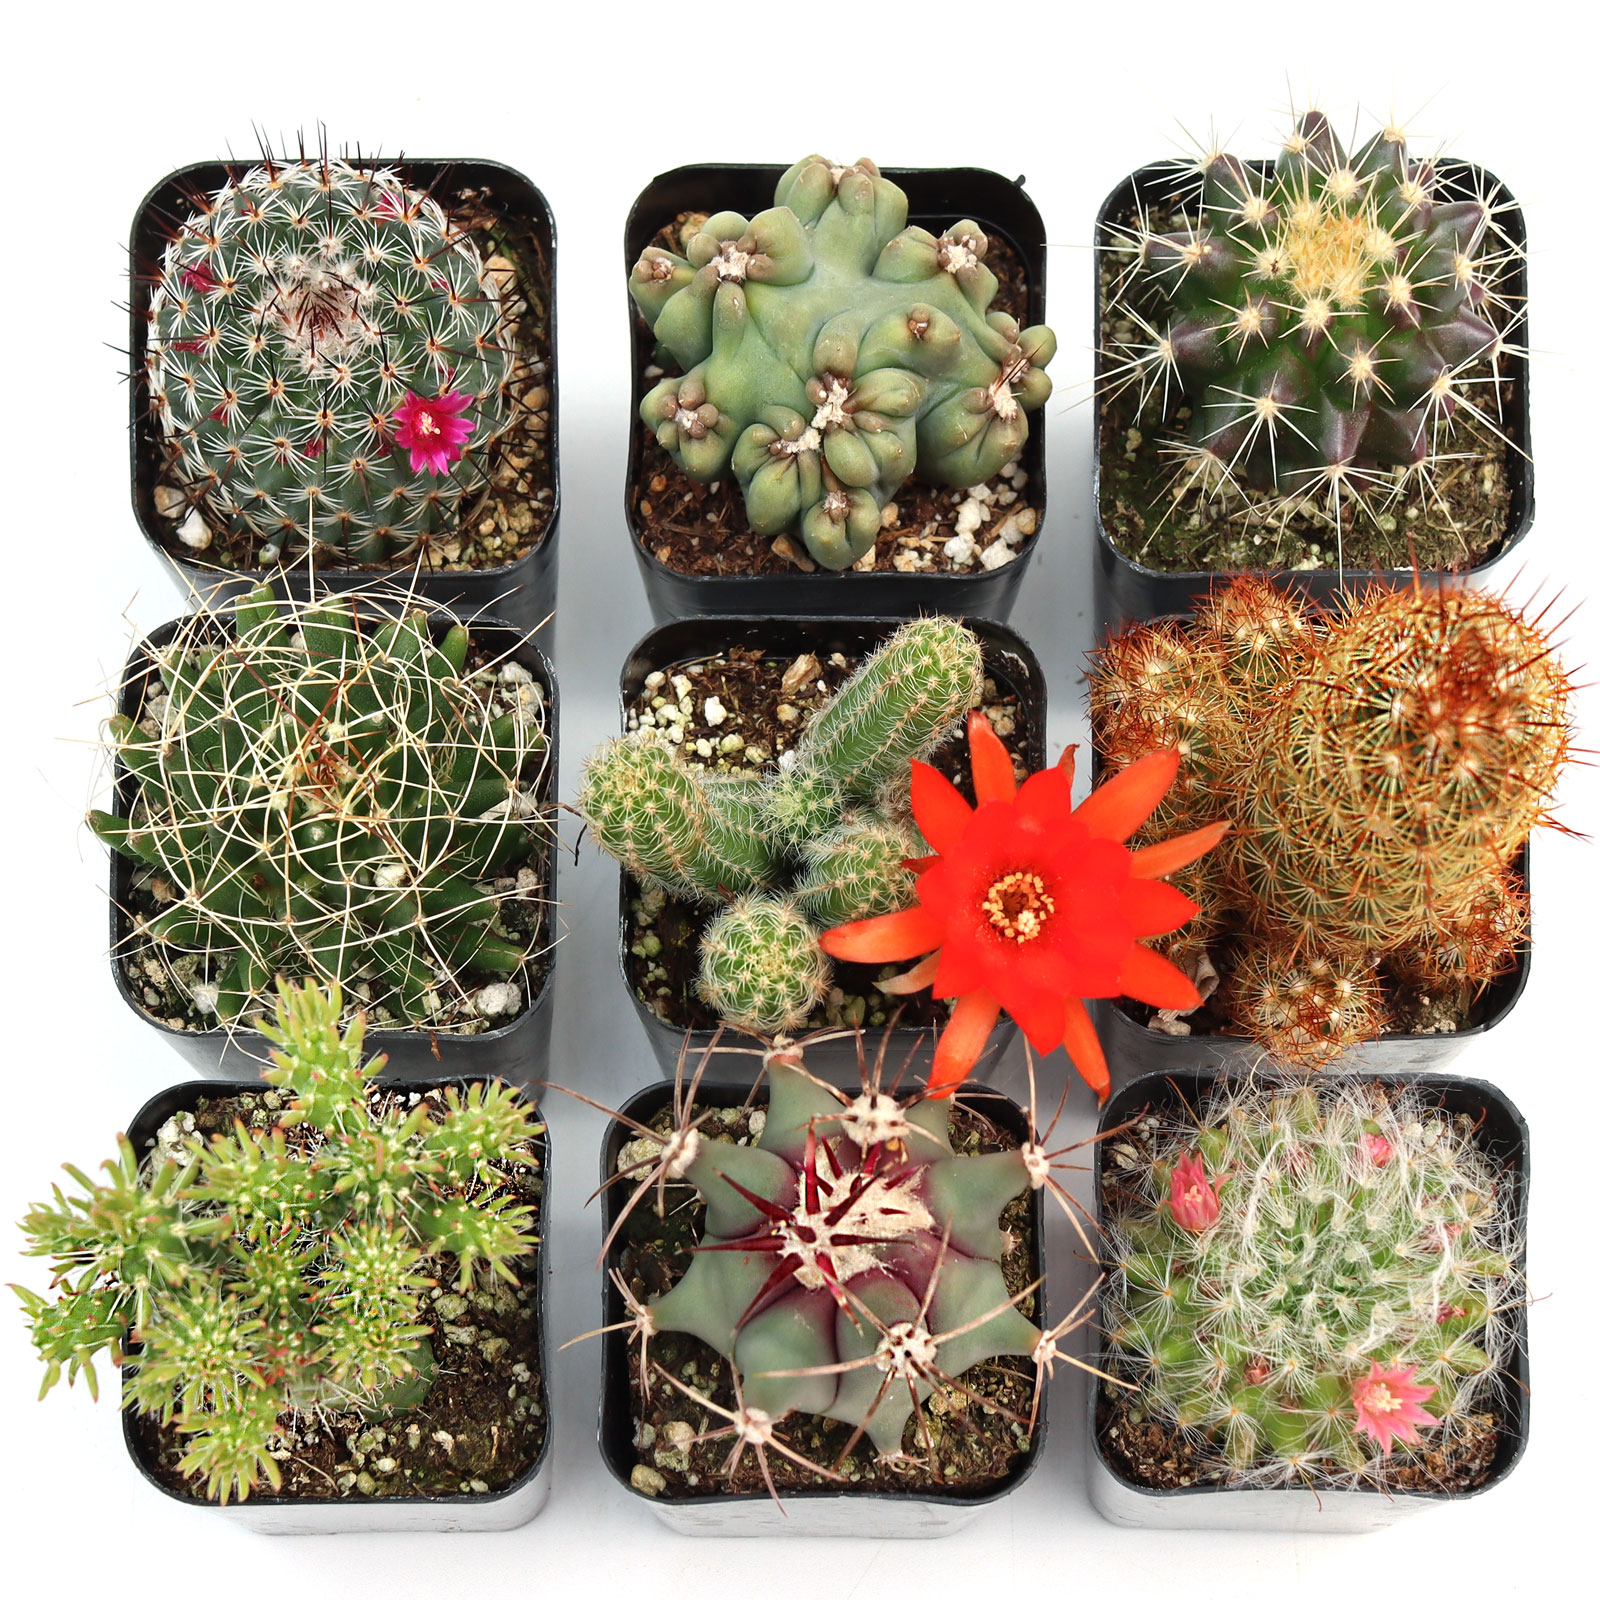 Do you have containers and soils to transplant the cacti in, or what do you recommend